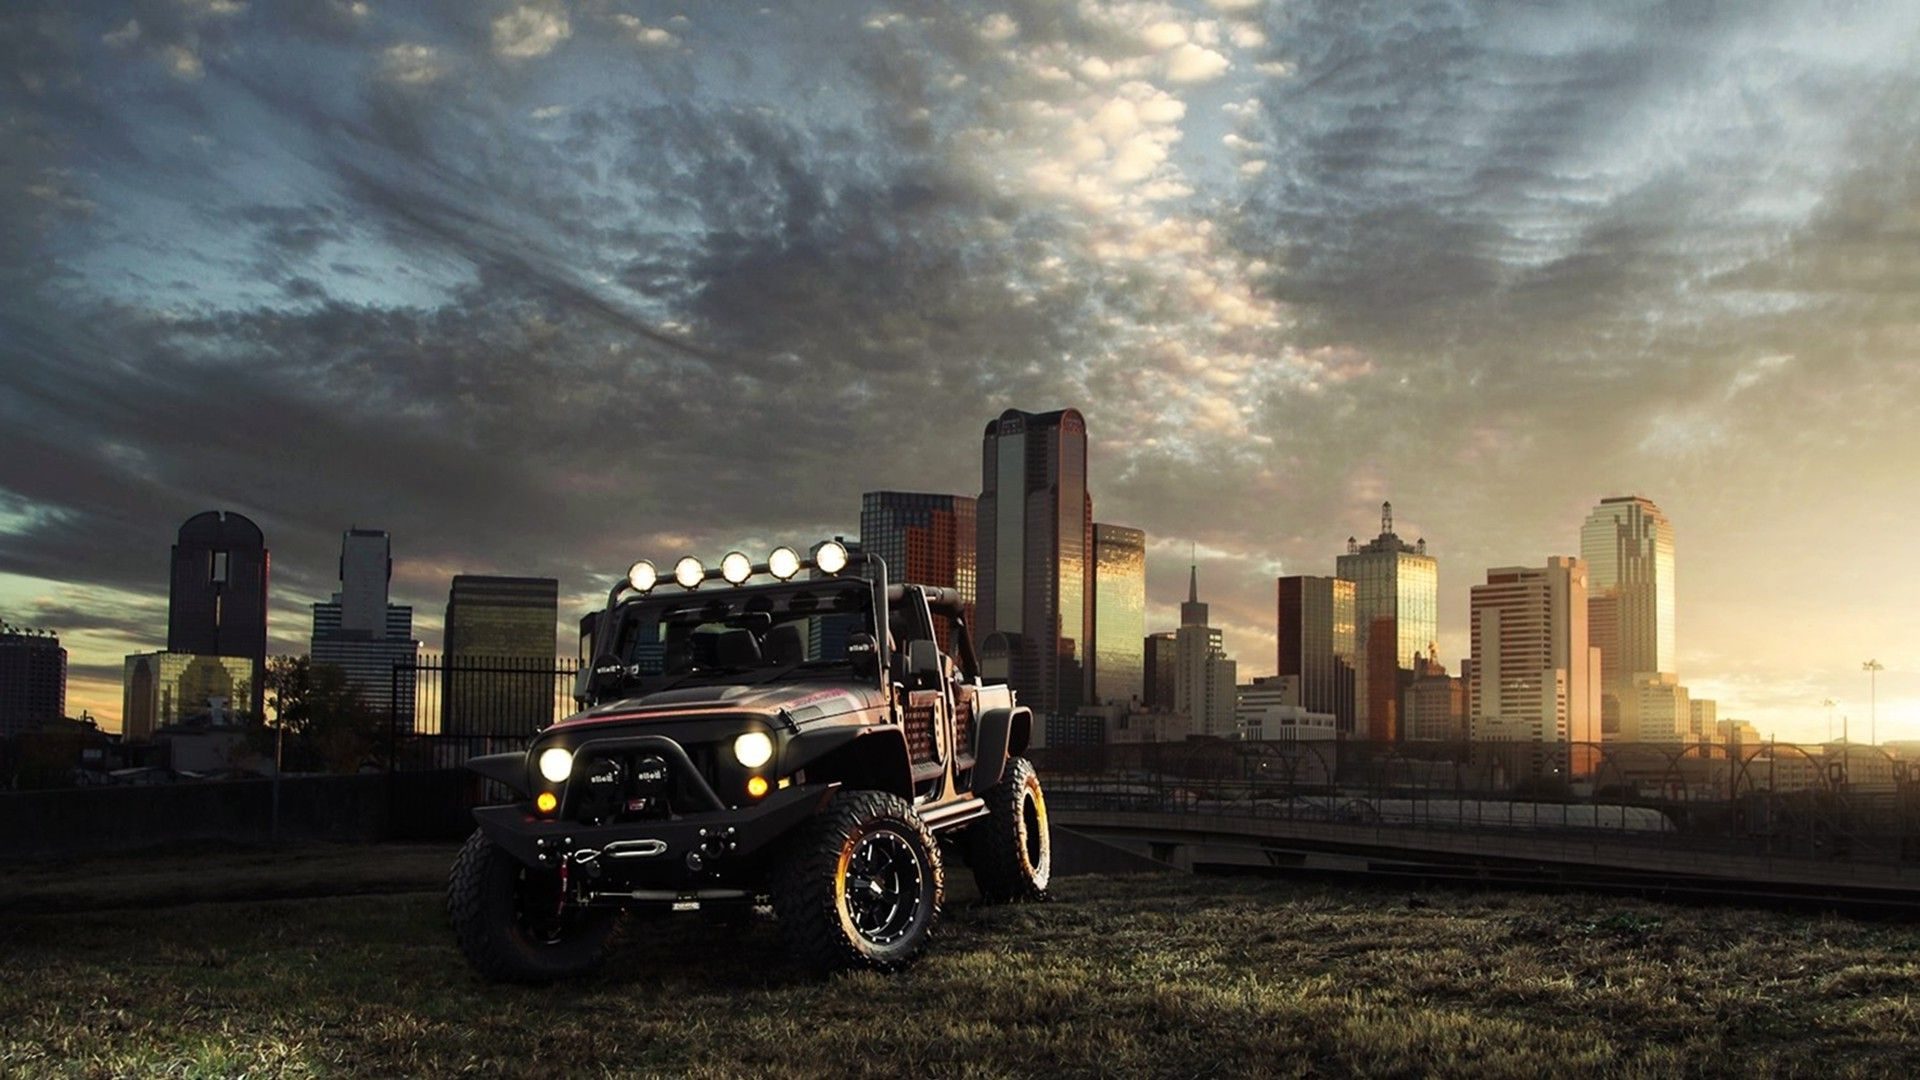 Hd Wallpaper Of The Rugged Jeep Wrangler Overlooking - Jeep Wrangler , HD Wallpaper & Backgrounds